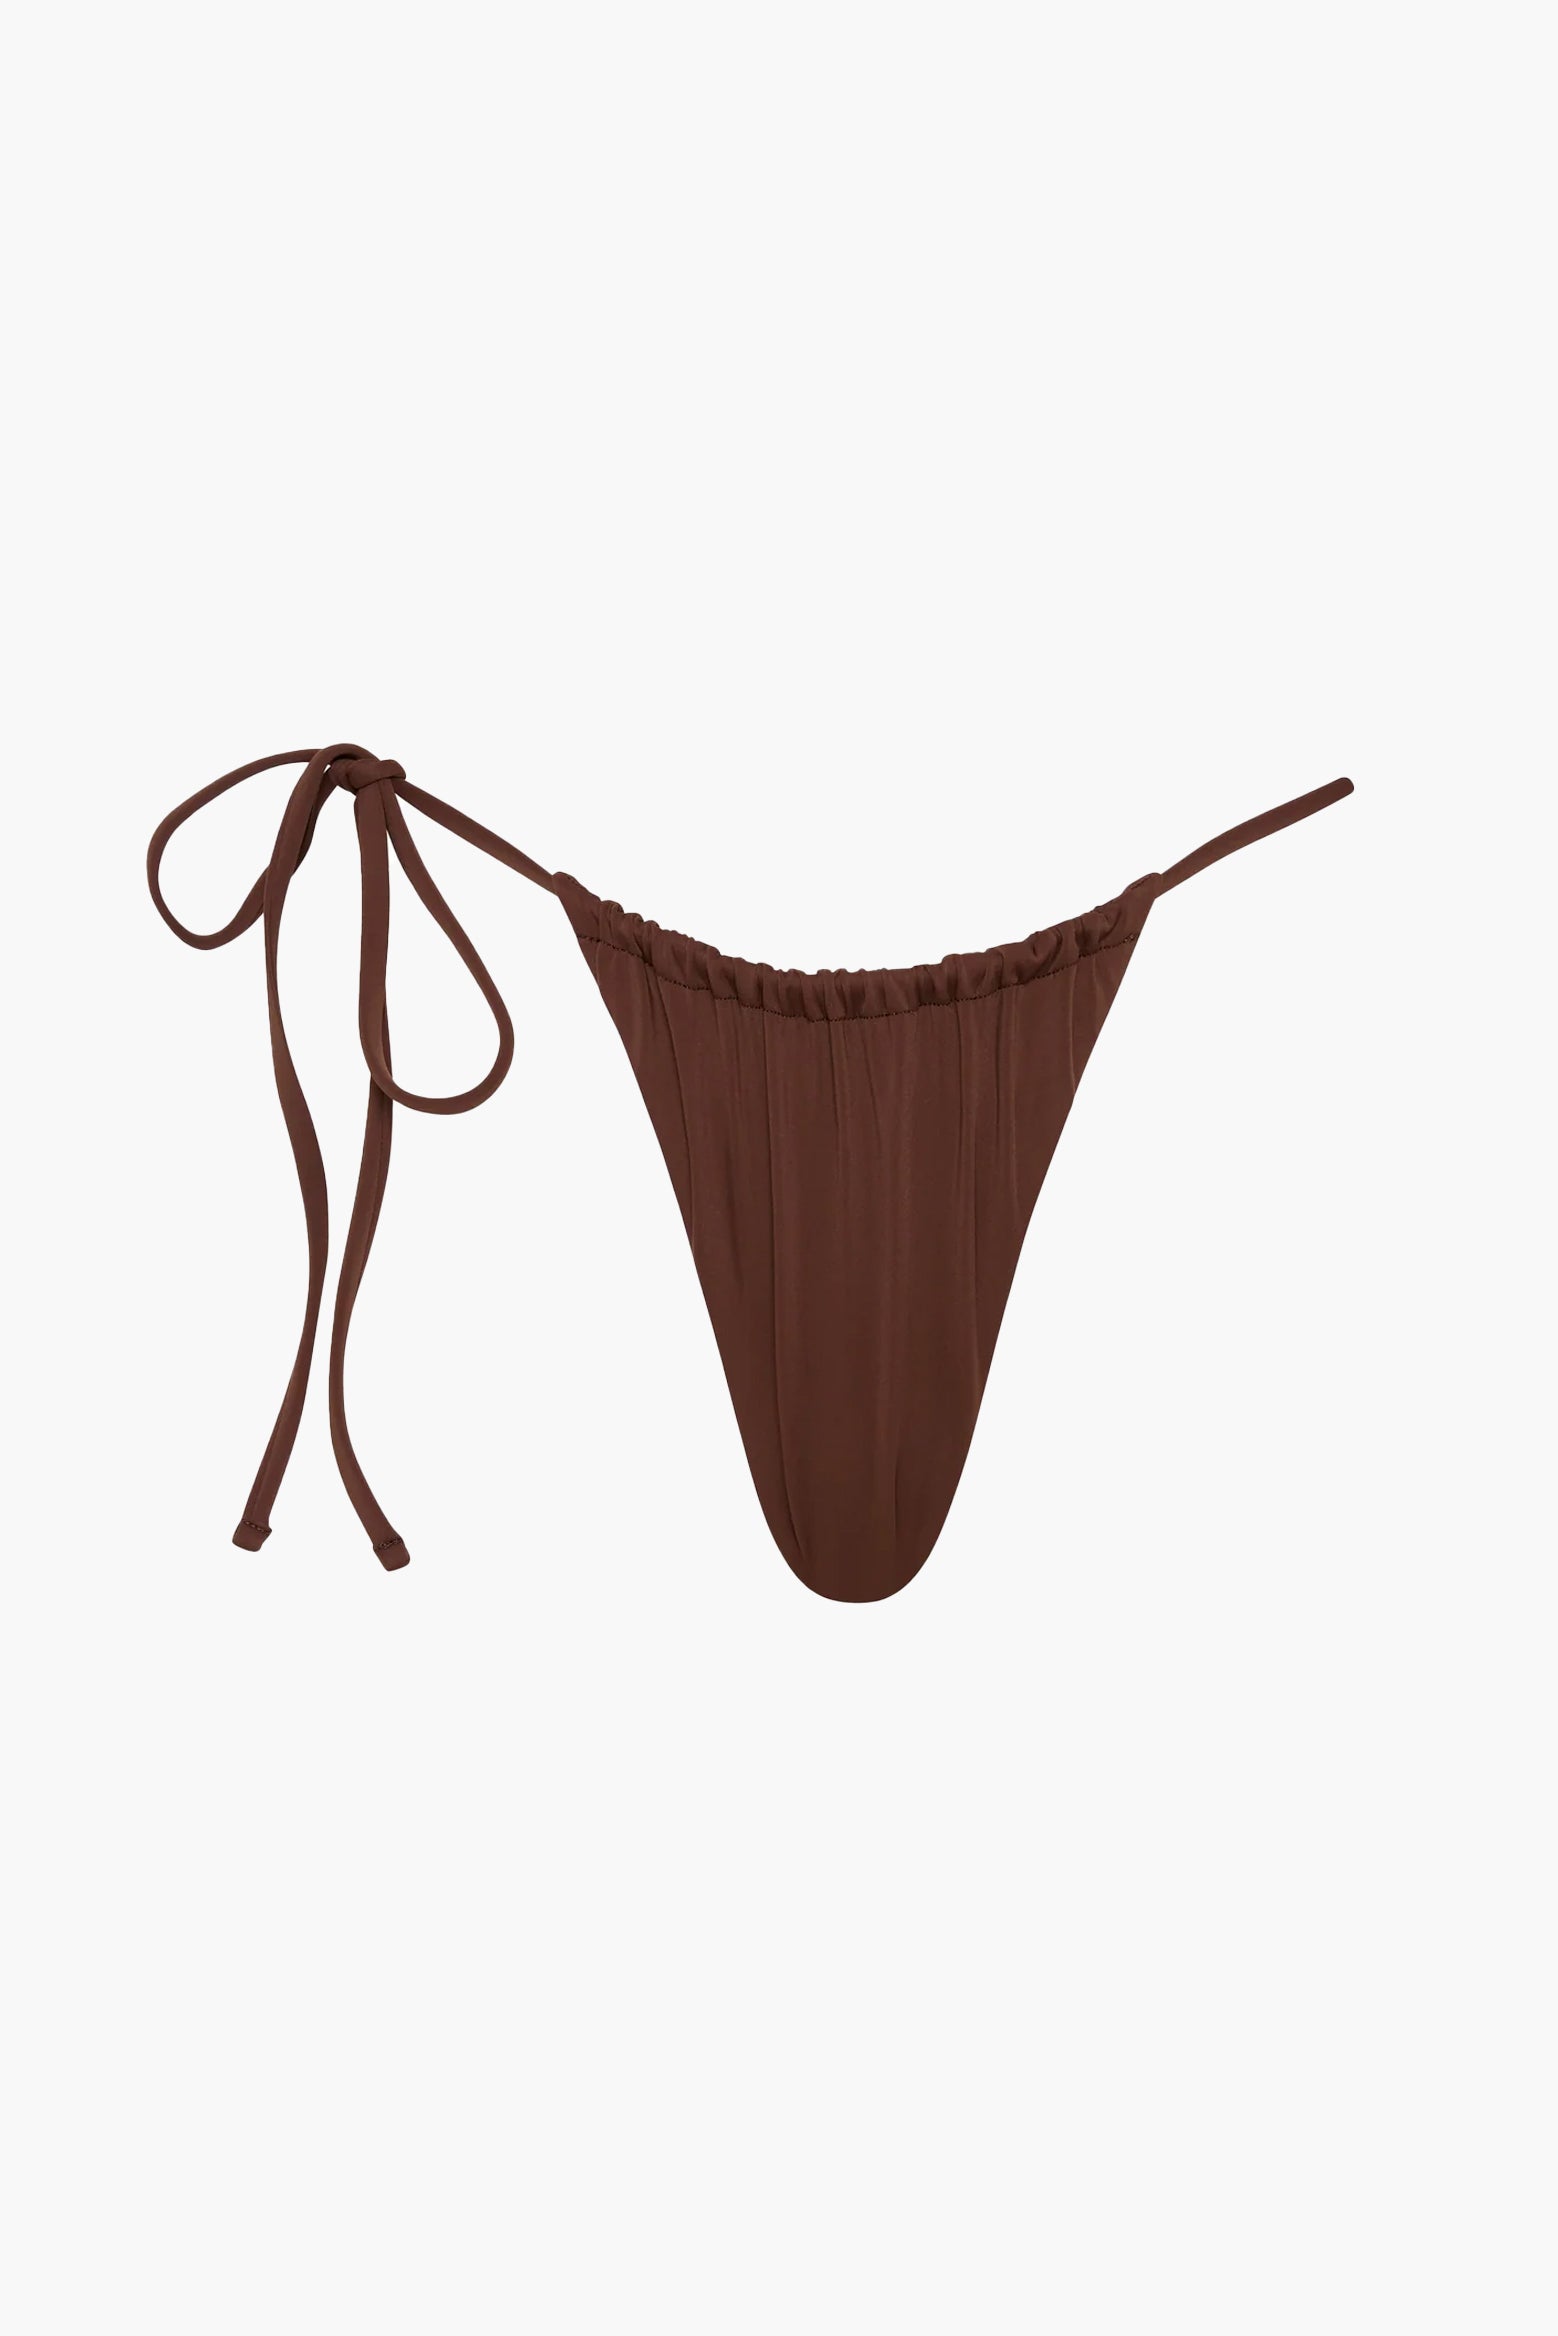 SIR Jeanne String Brief in Chocolate available at The New Trend Australia.